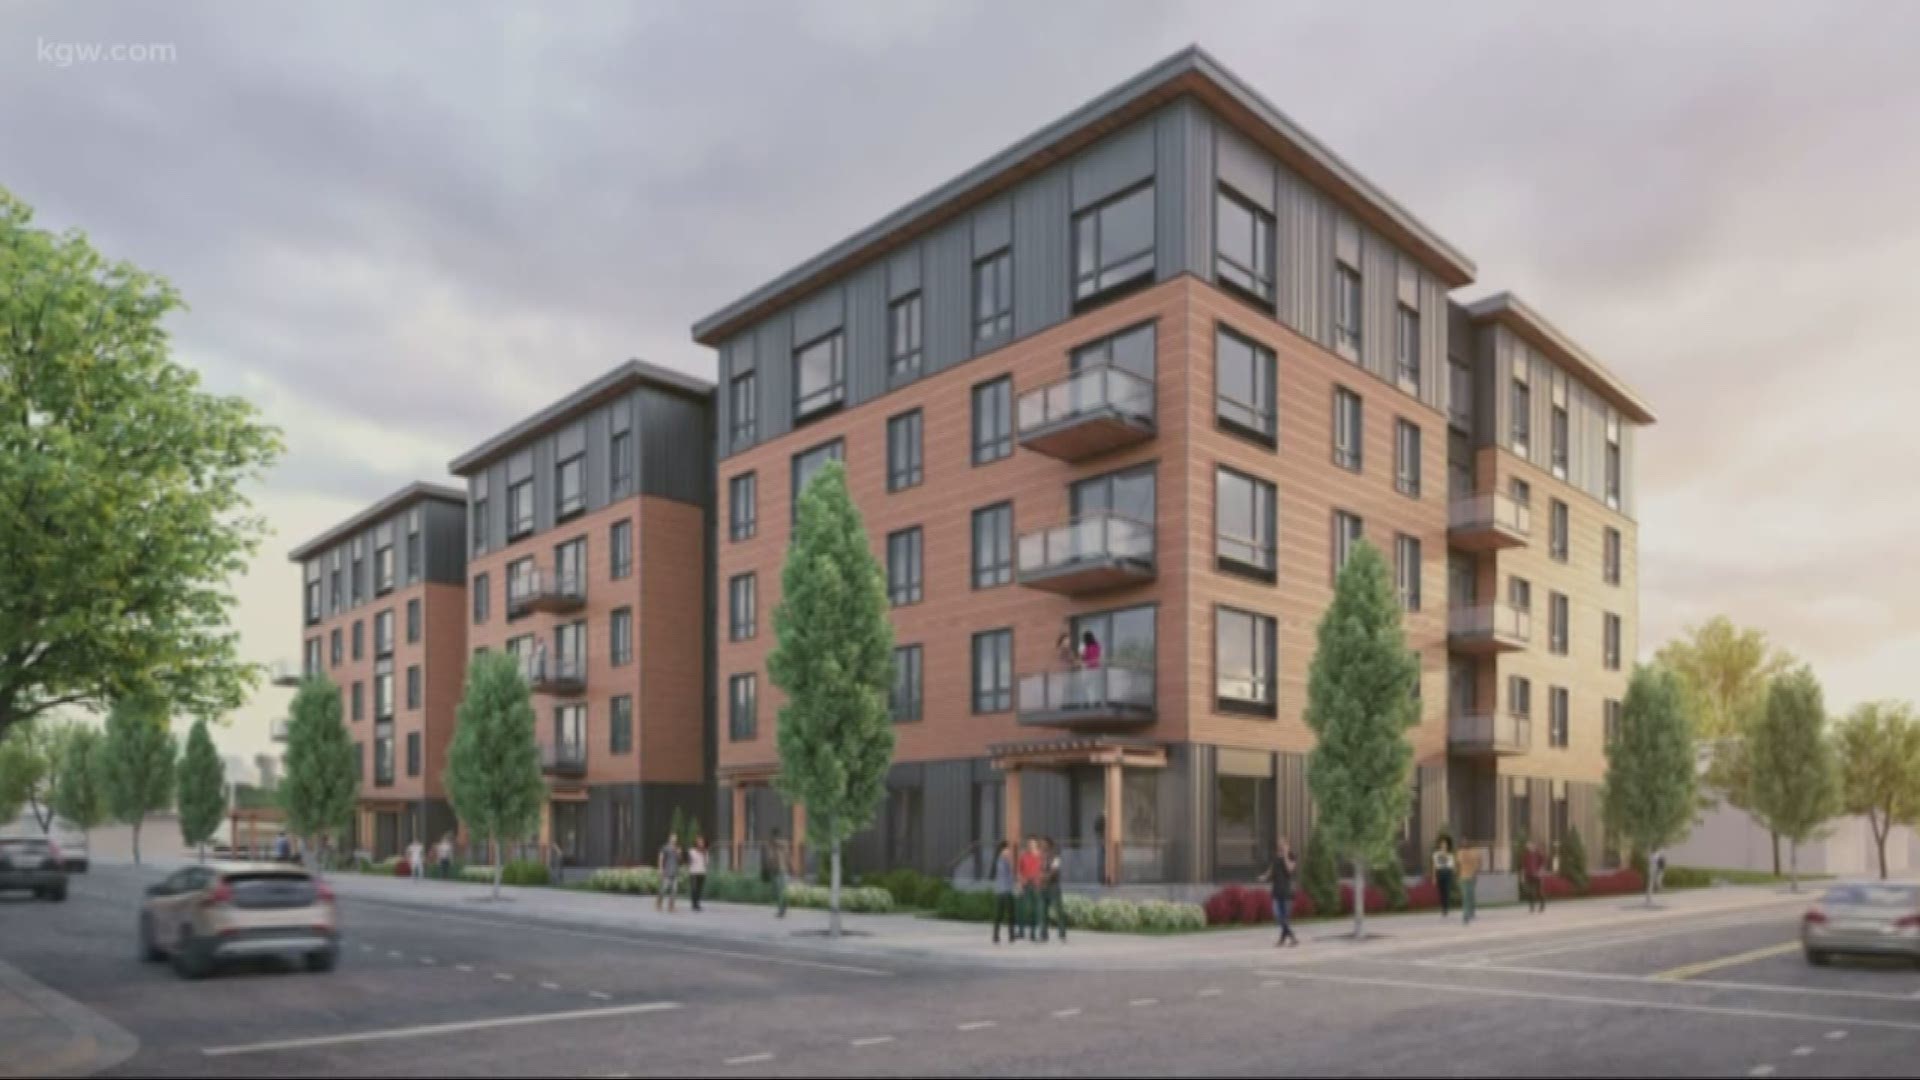 The building on North Williams Avenue will encompass an entire city block and include 61 large family units.